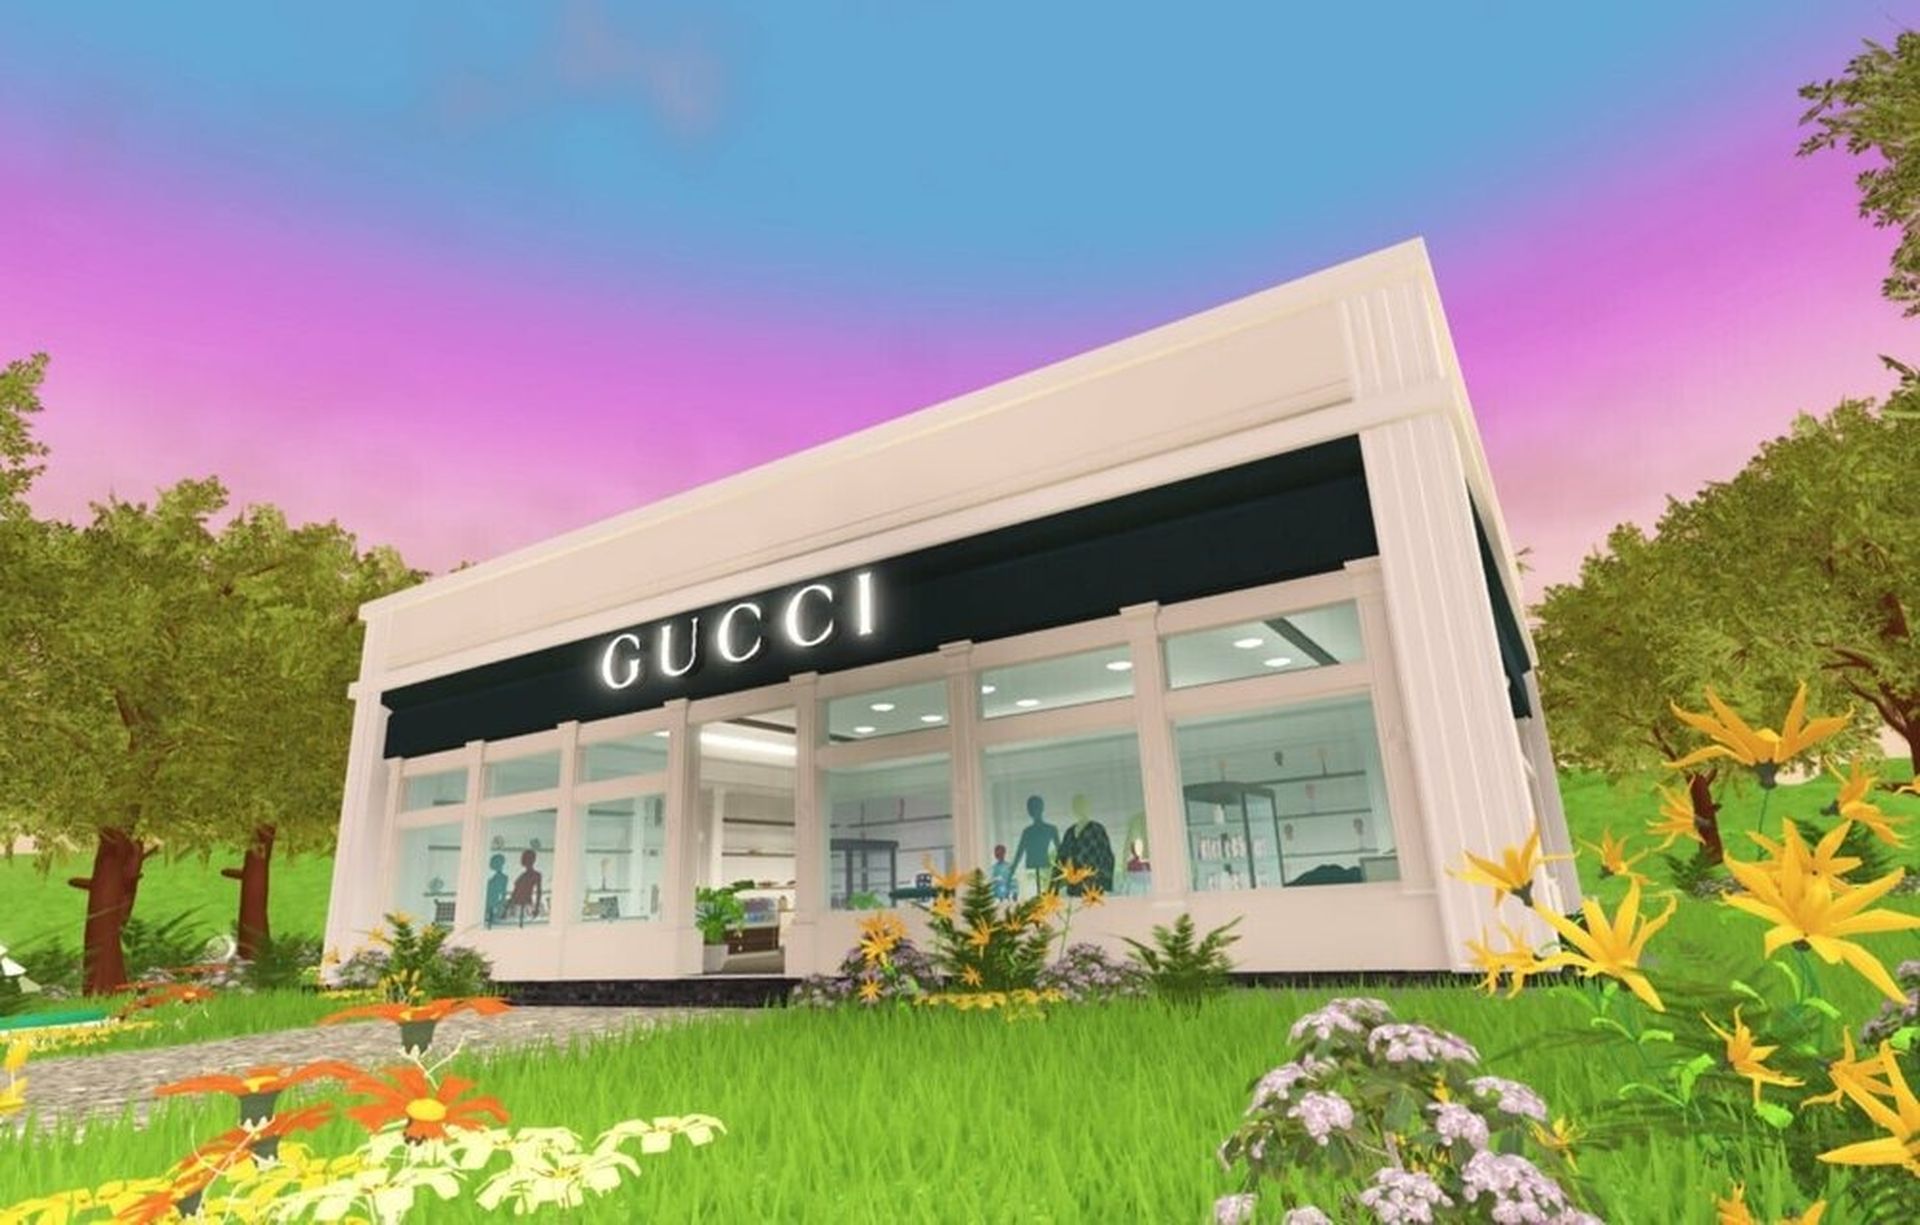 Gucci extending its engagement on the virtual gaming platform and we are here to provide players with Roblox Gucci Town promo codes.